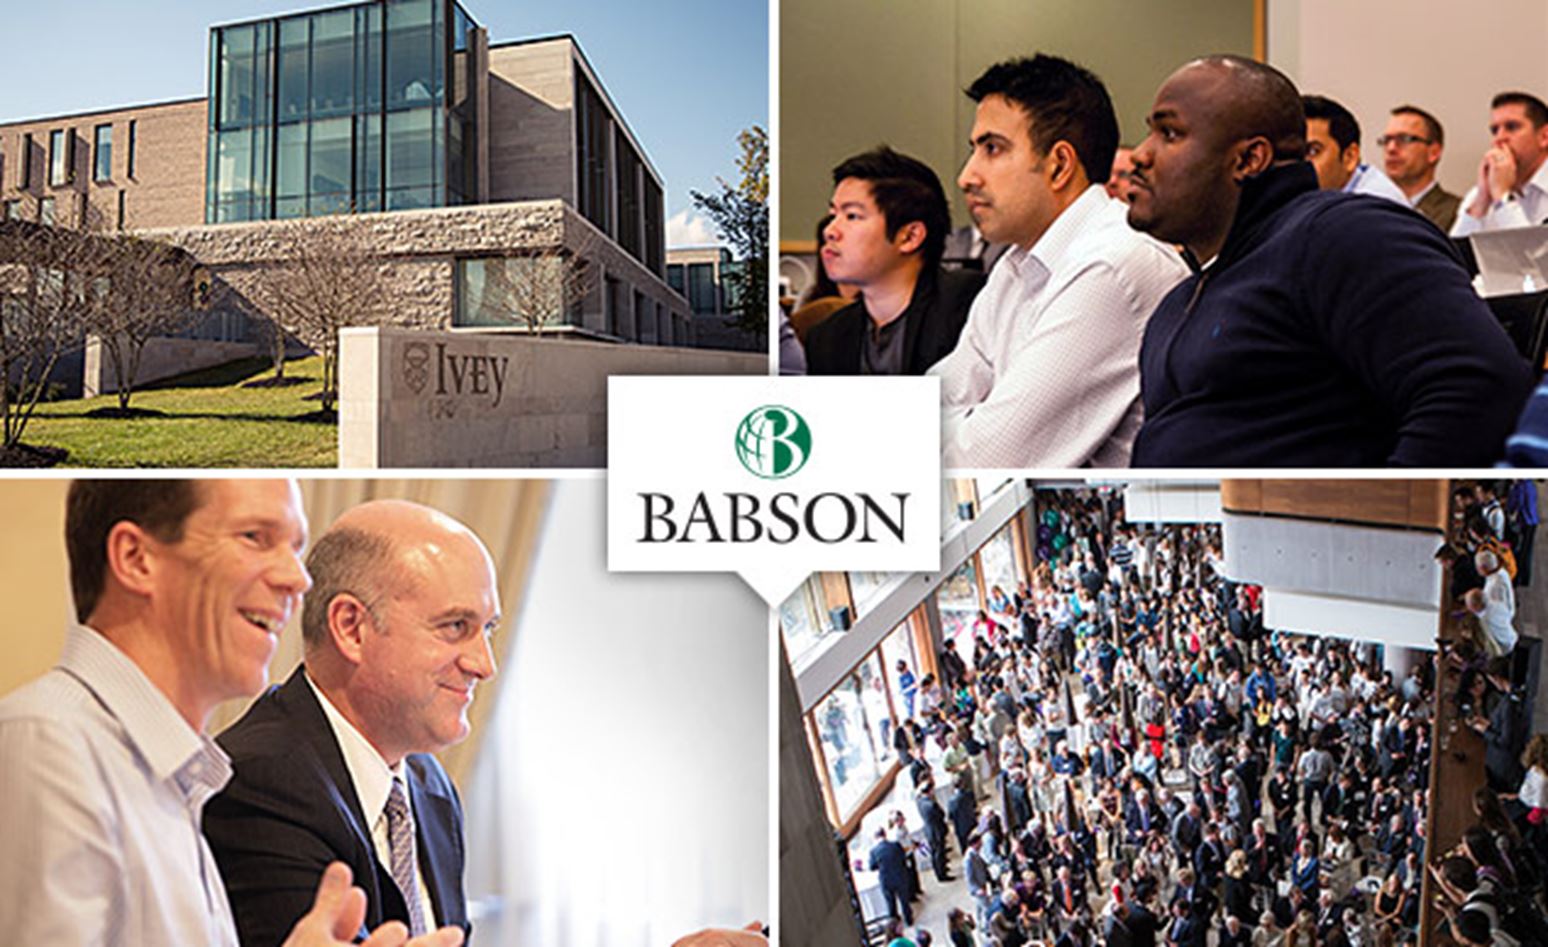 Babson1